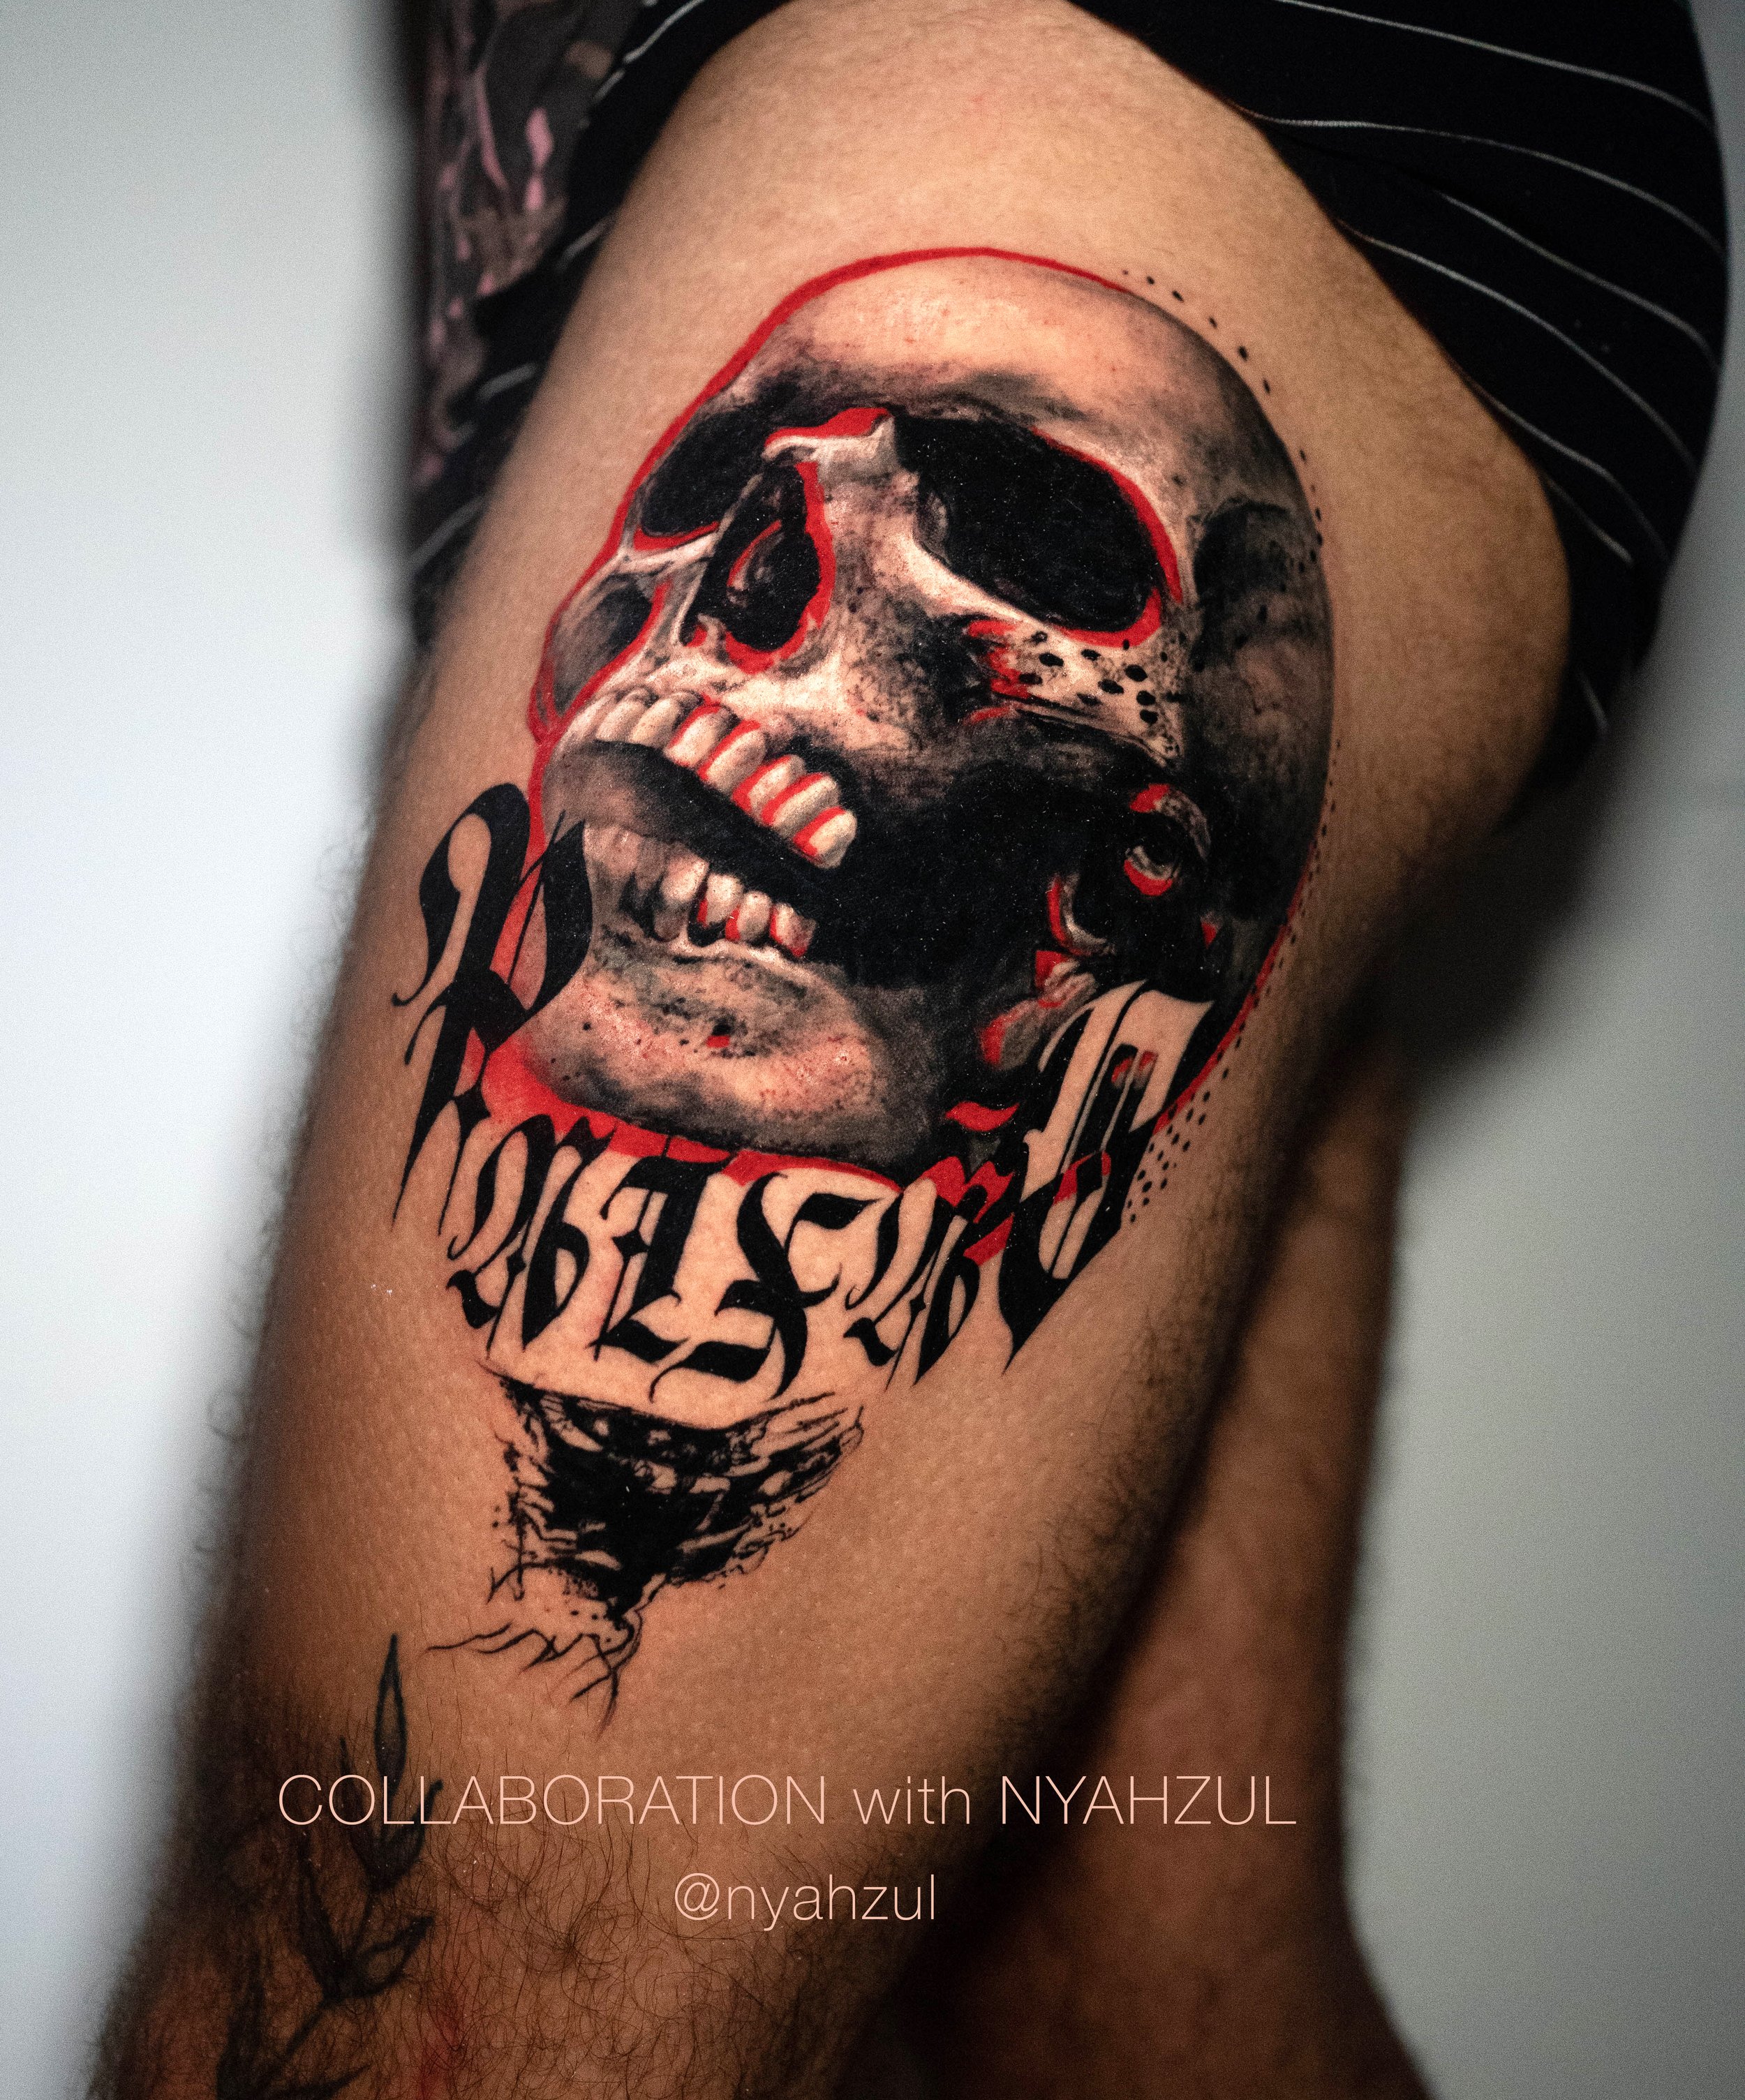  Collaboration with Nyahzul (@nyahzul) done in Barcelona, Spain at Four Roses Fine Line Tattoo Studio, 2022 